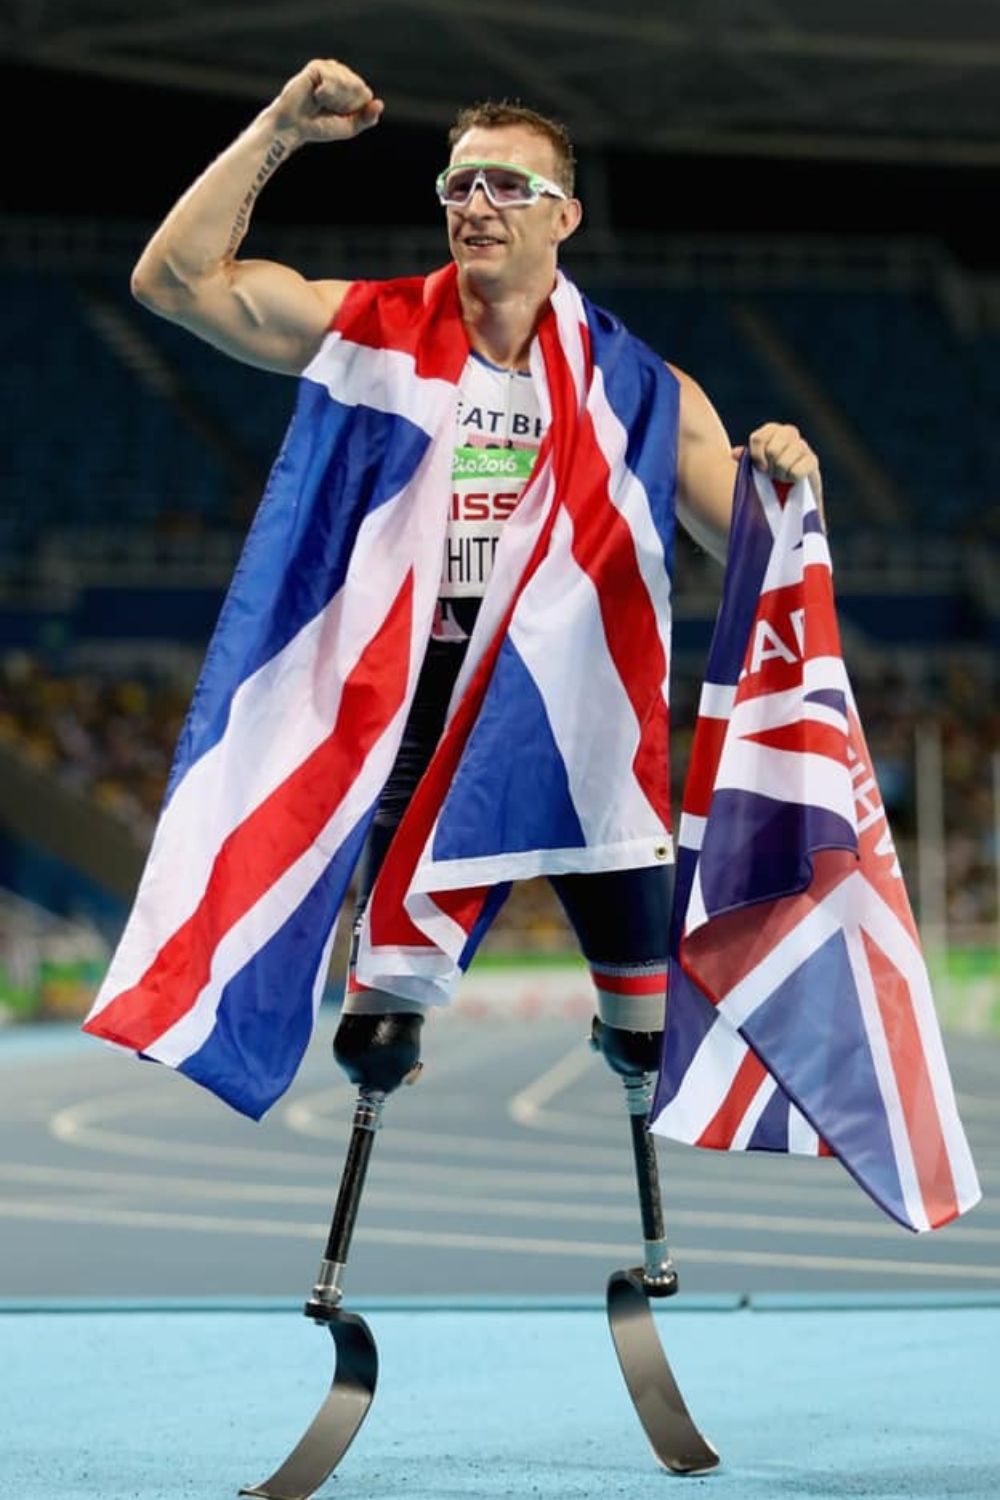 Richard Whitehead Won Silver In The T61 200 Metres At The 2020 Tokyo Paralympics